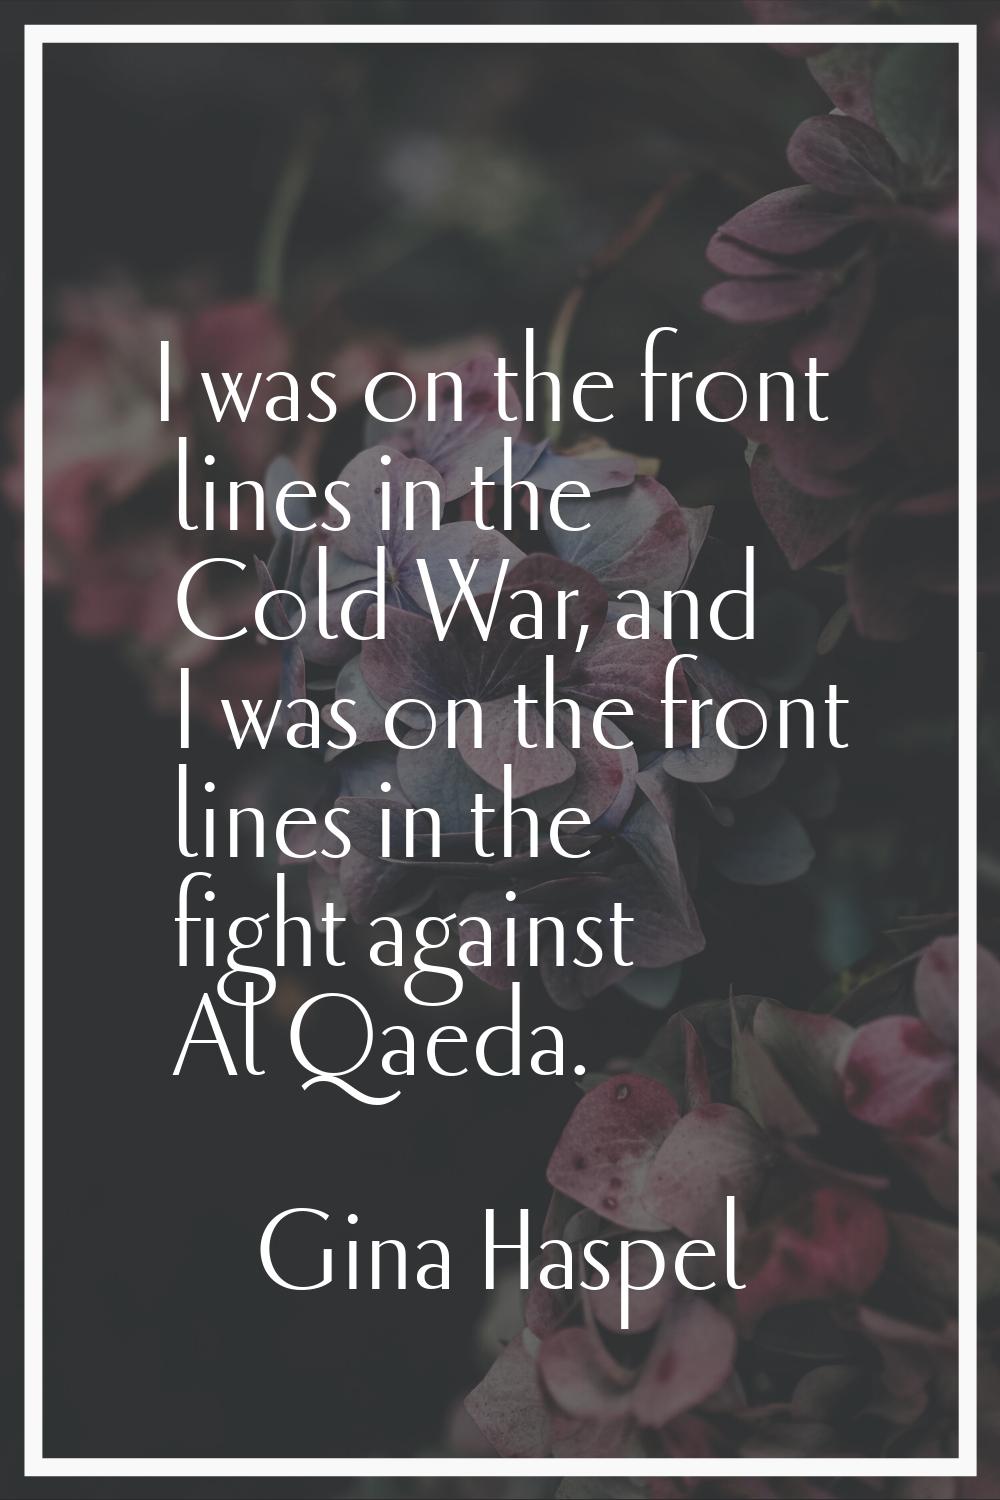 I was on the front lines in the Cold War, and I was on the front lines in the fight against Al Qaed